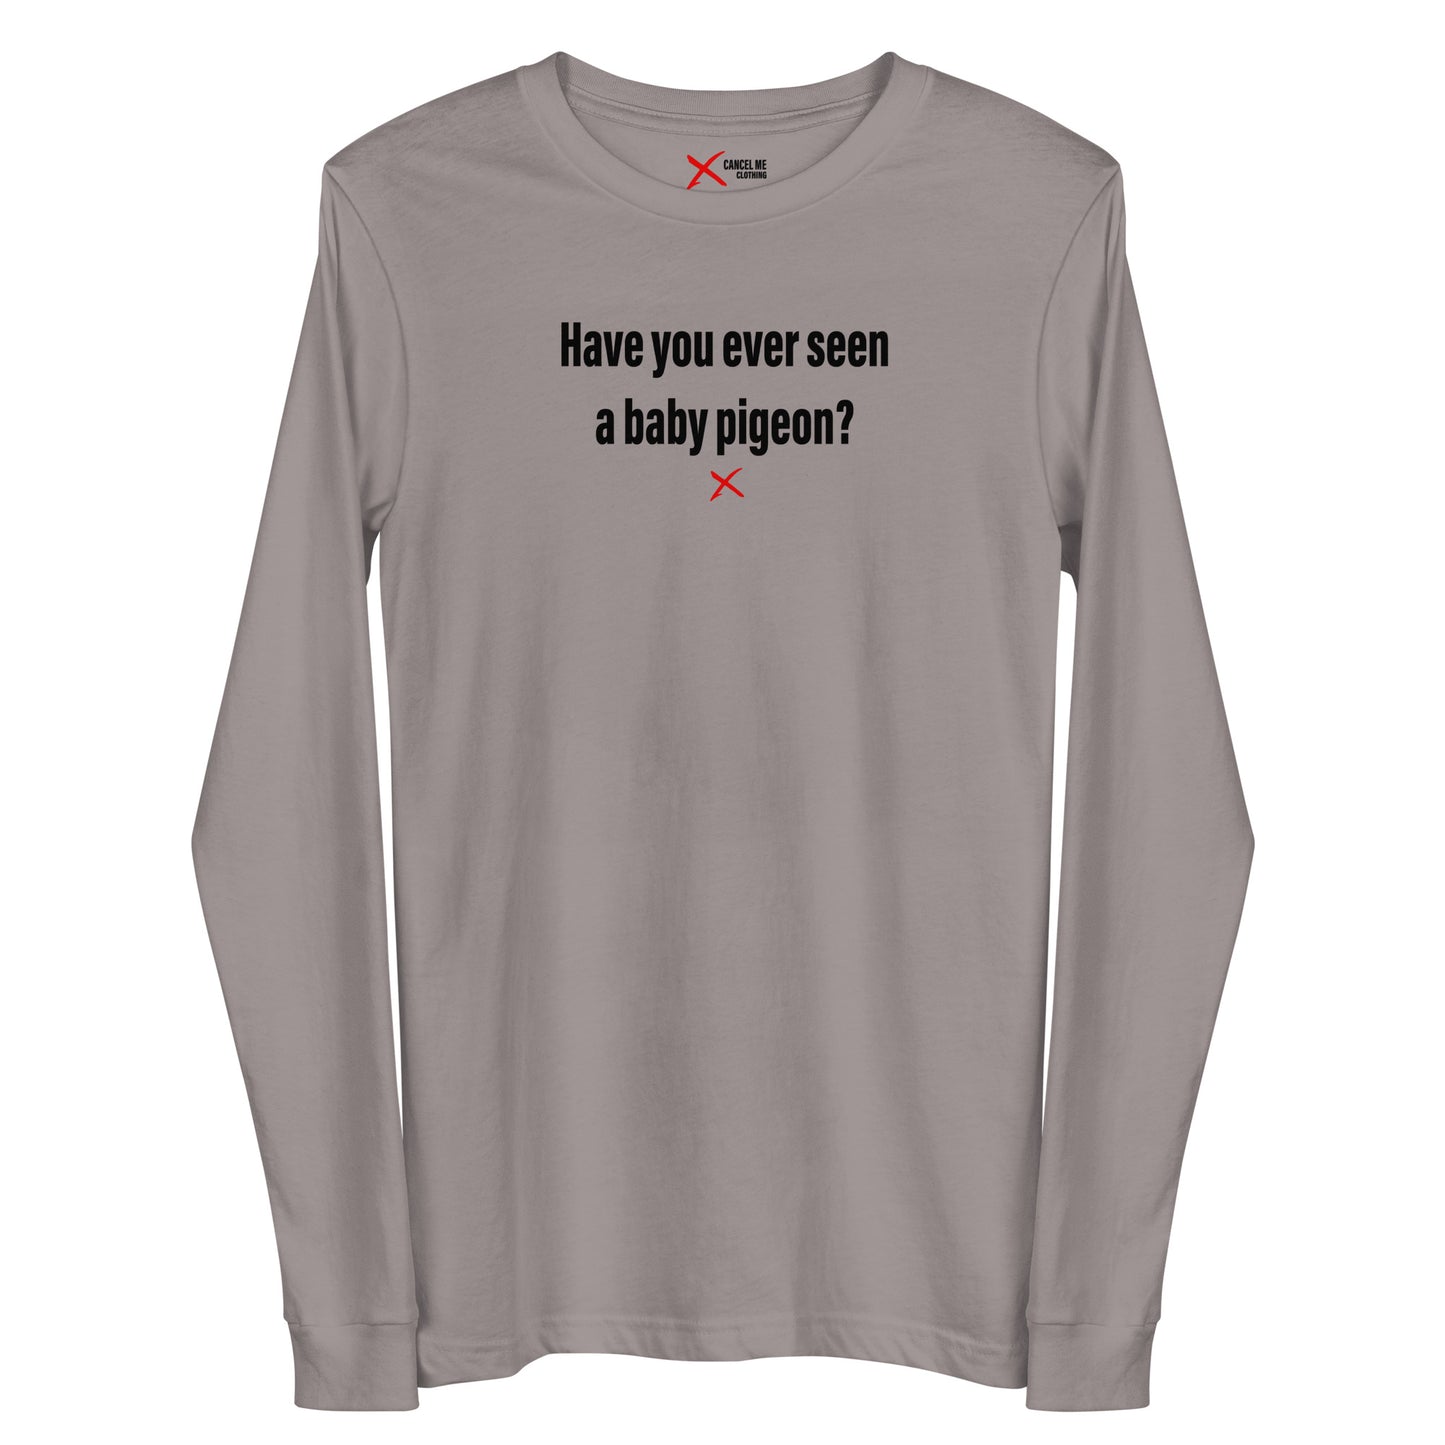 Have you ever seen a baby pigeon? - Longsleeve